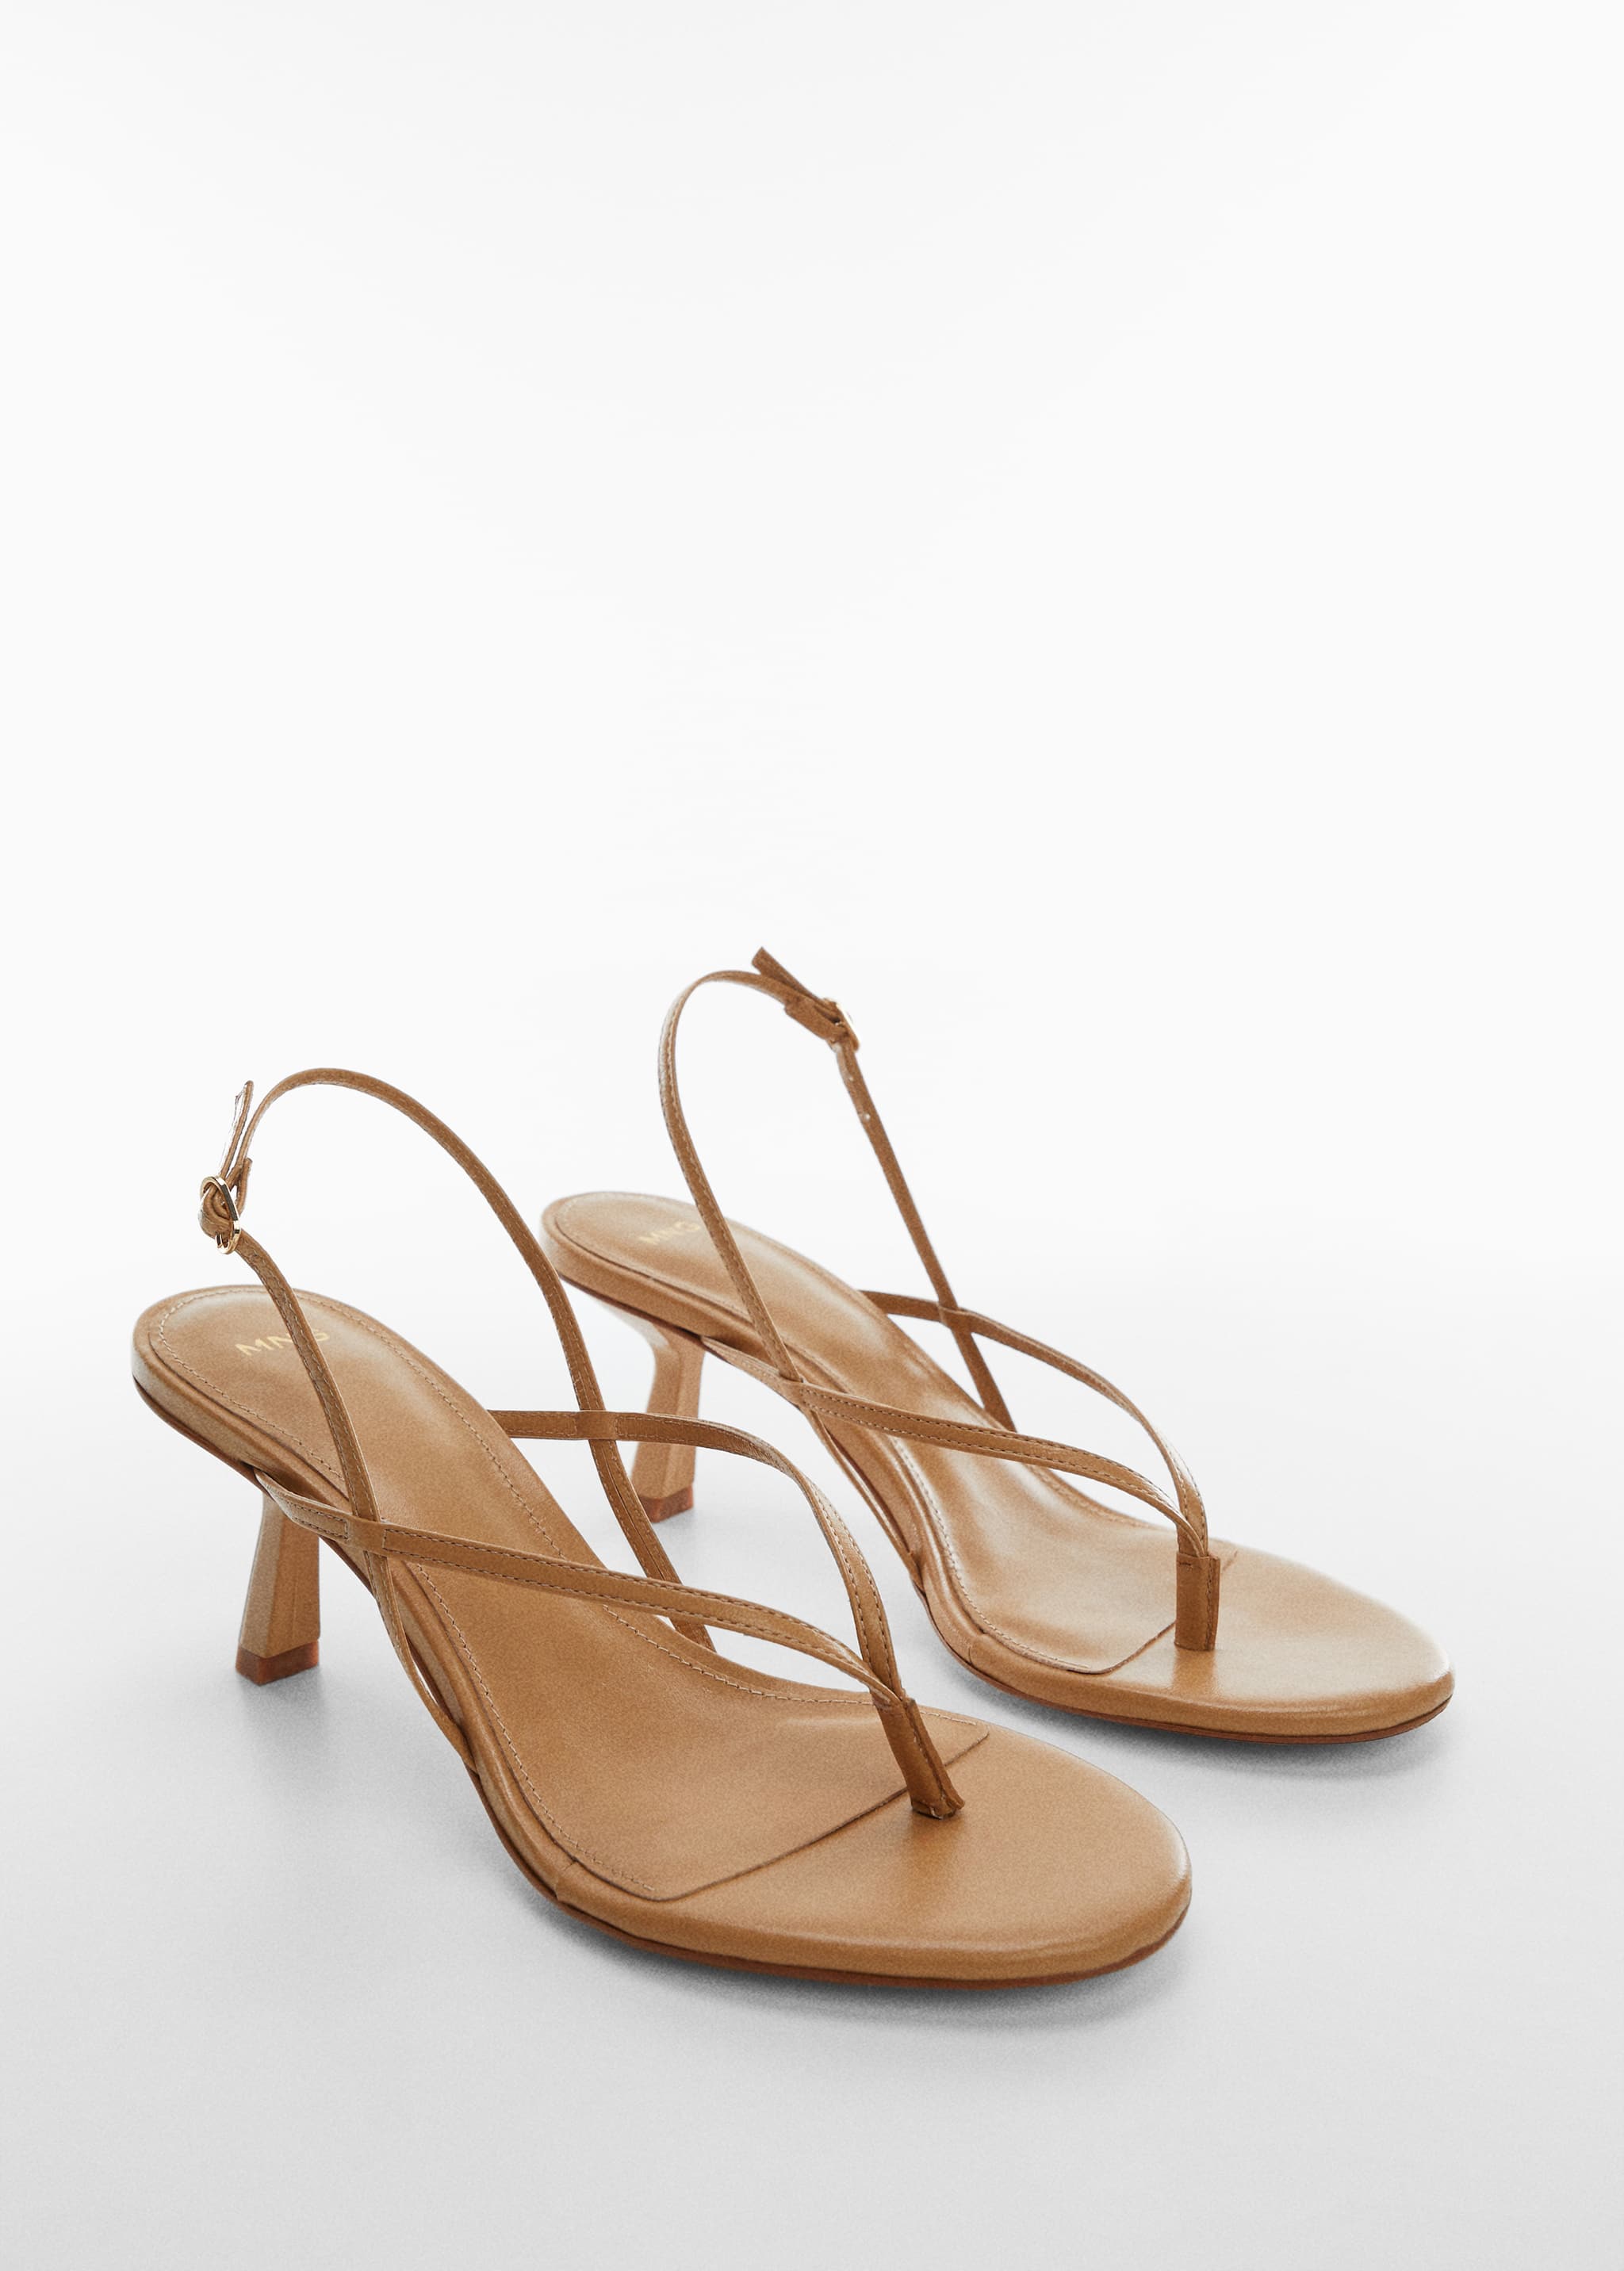 Heeled leather sandals with straps - Medium plane